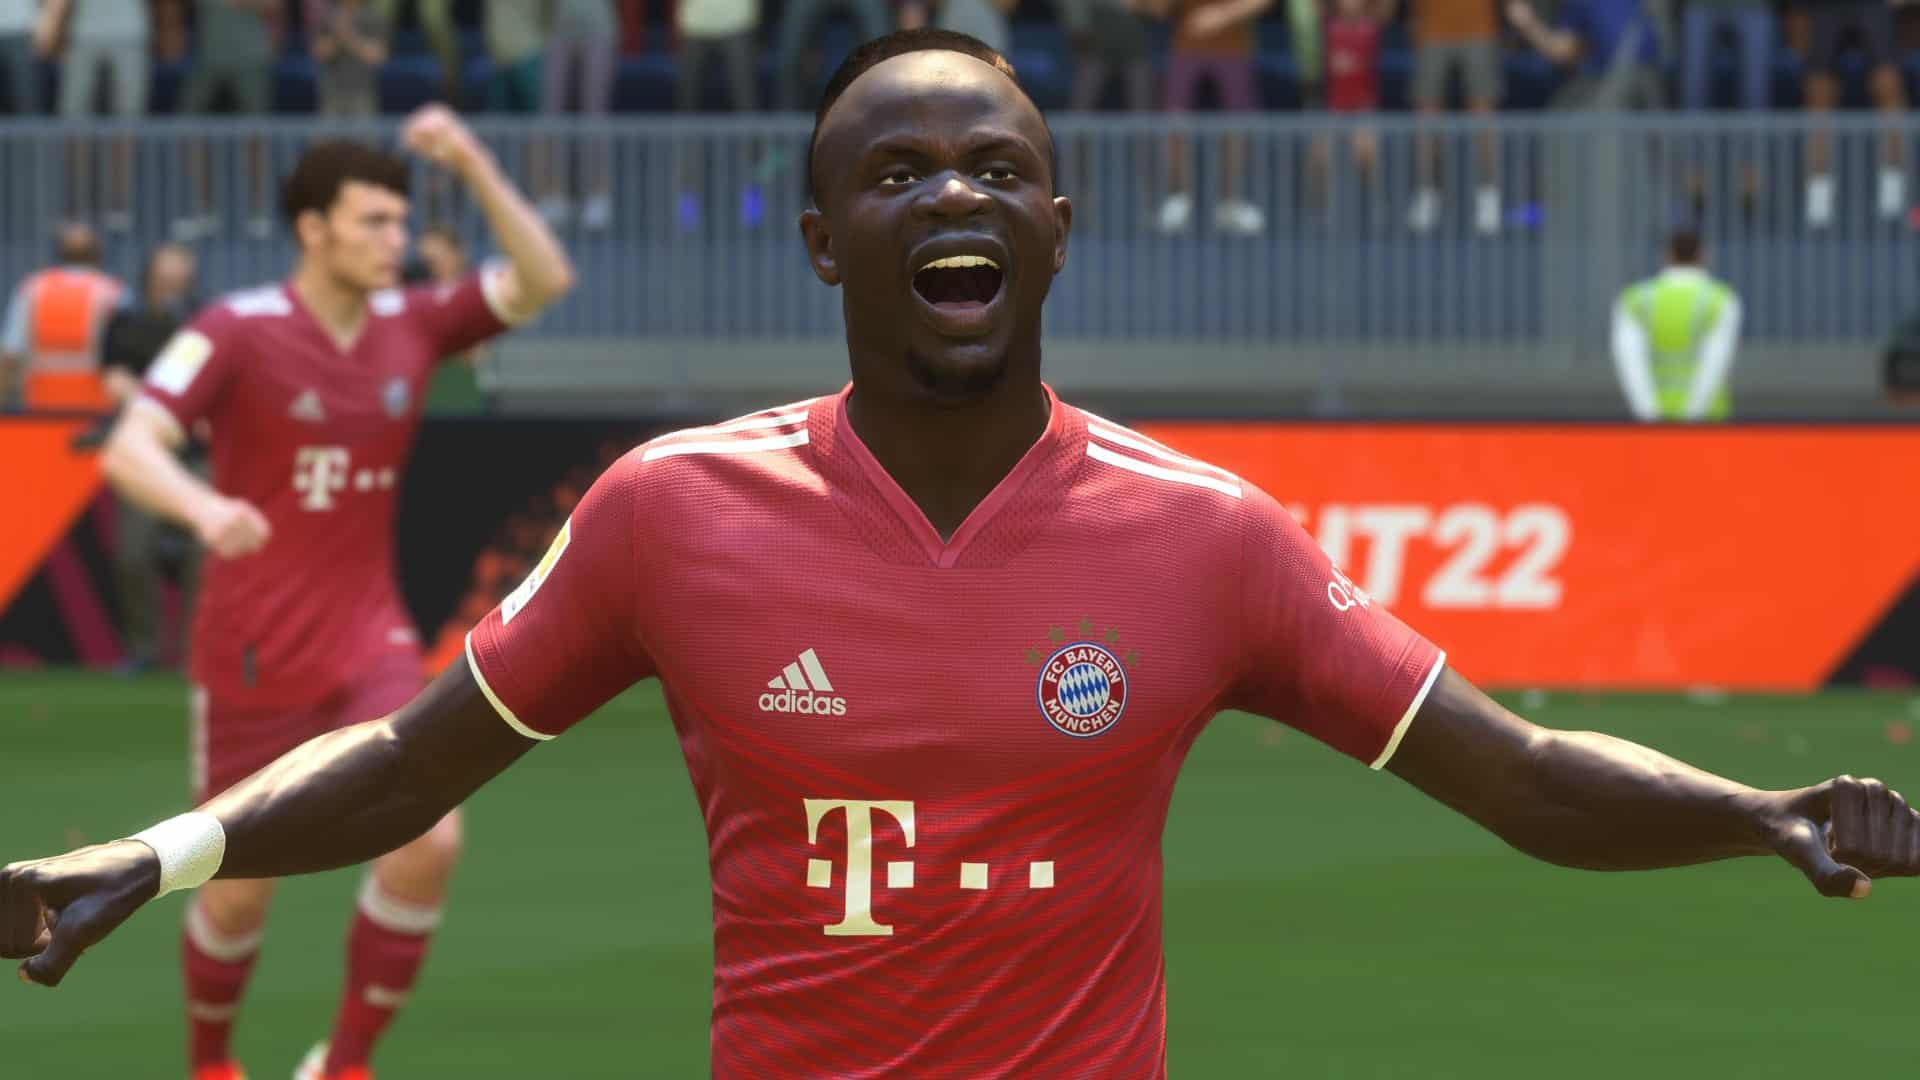 FIFA 23: EA Explains Why Players Love Loot Boxes and How They're Not That Bad